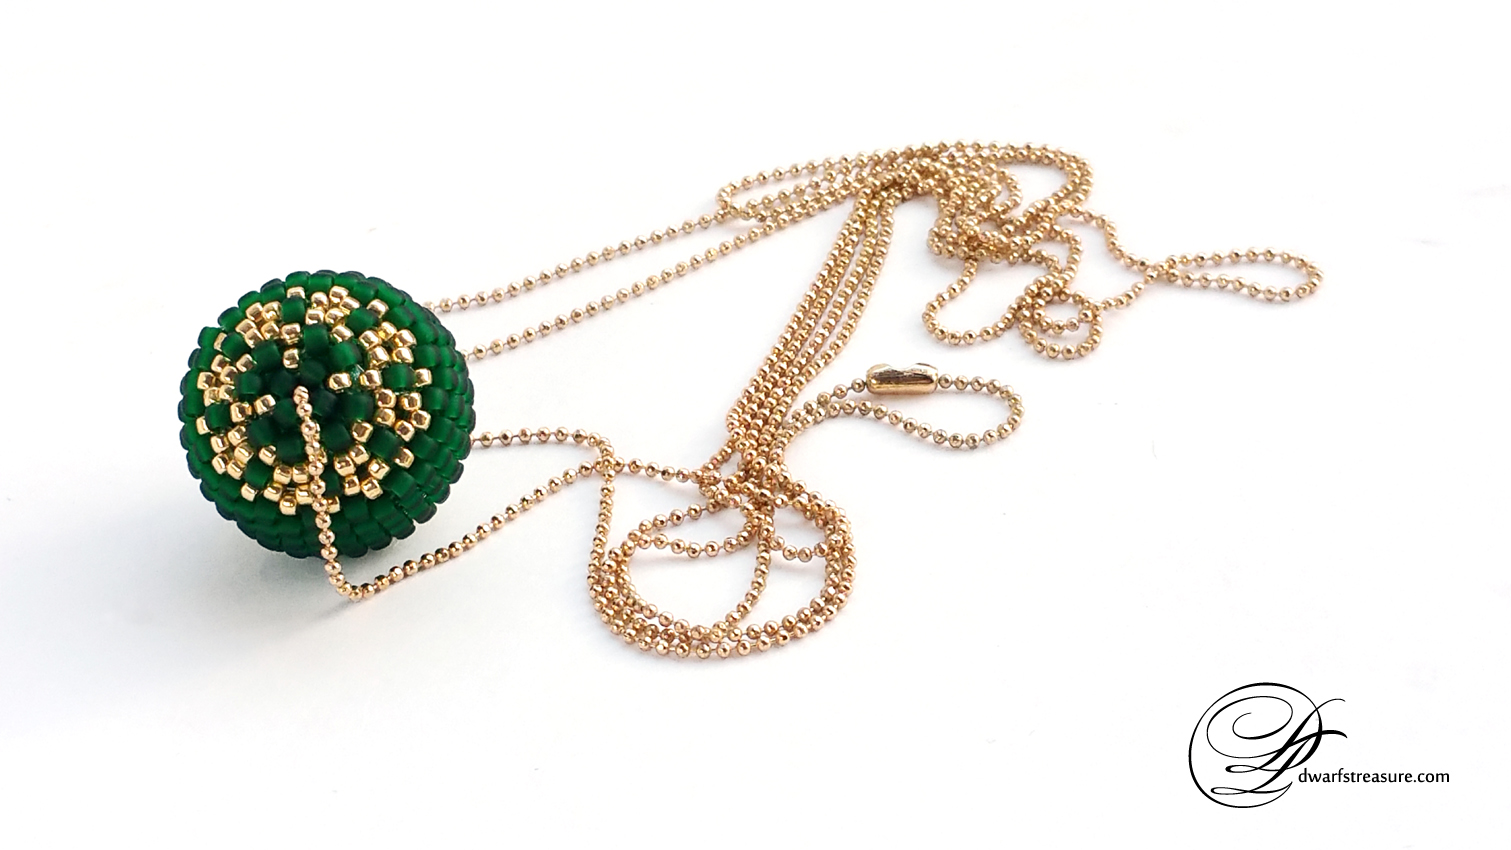 chain necklace with amazing emerald beaded ball pendant